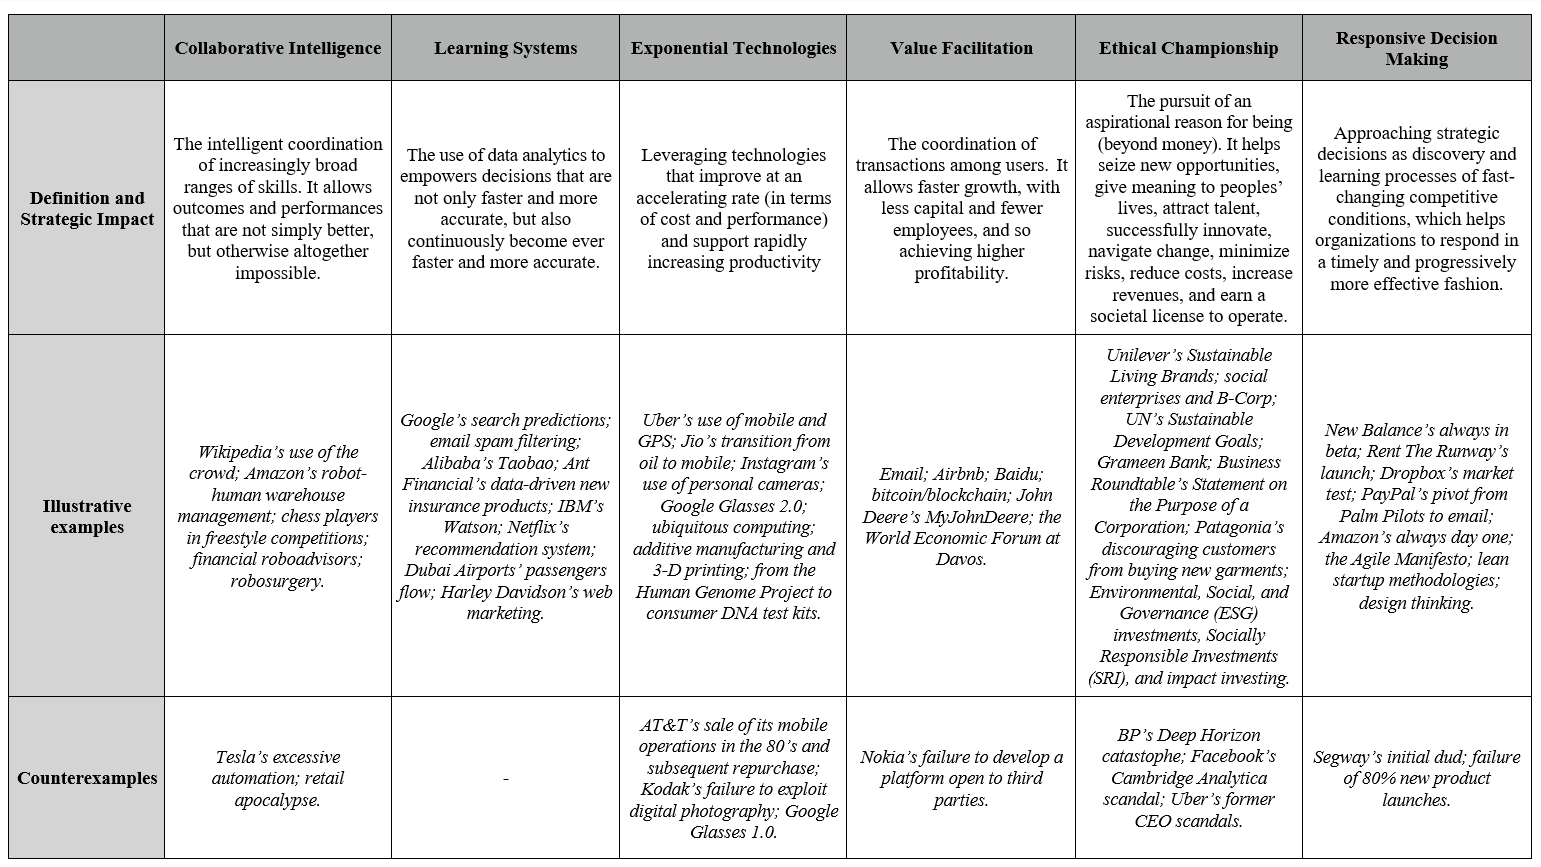 Table 2. The elements of the CLEVER framework